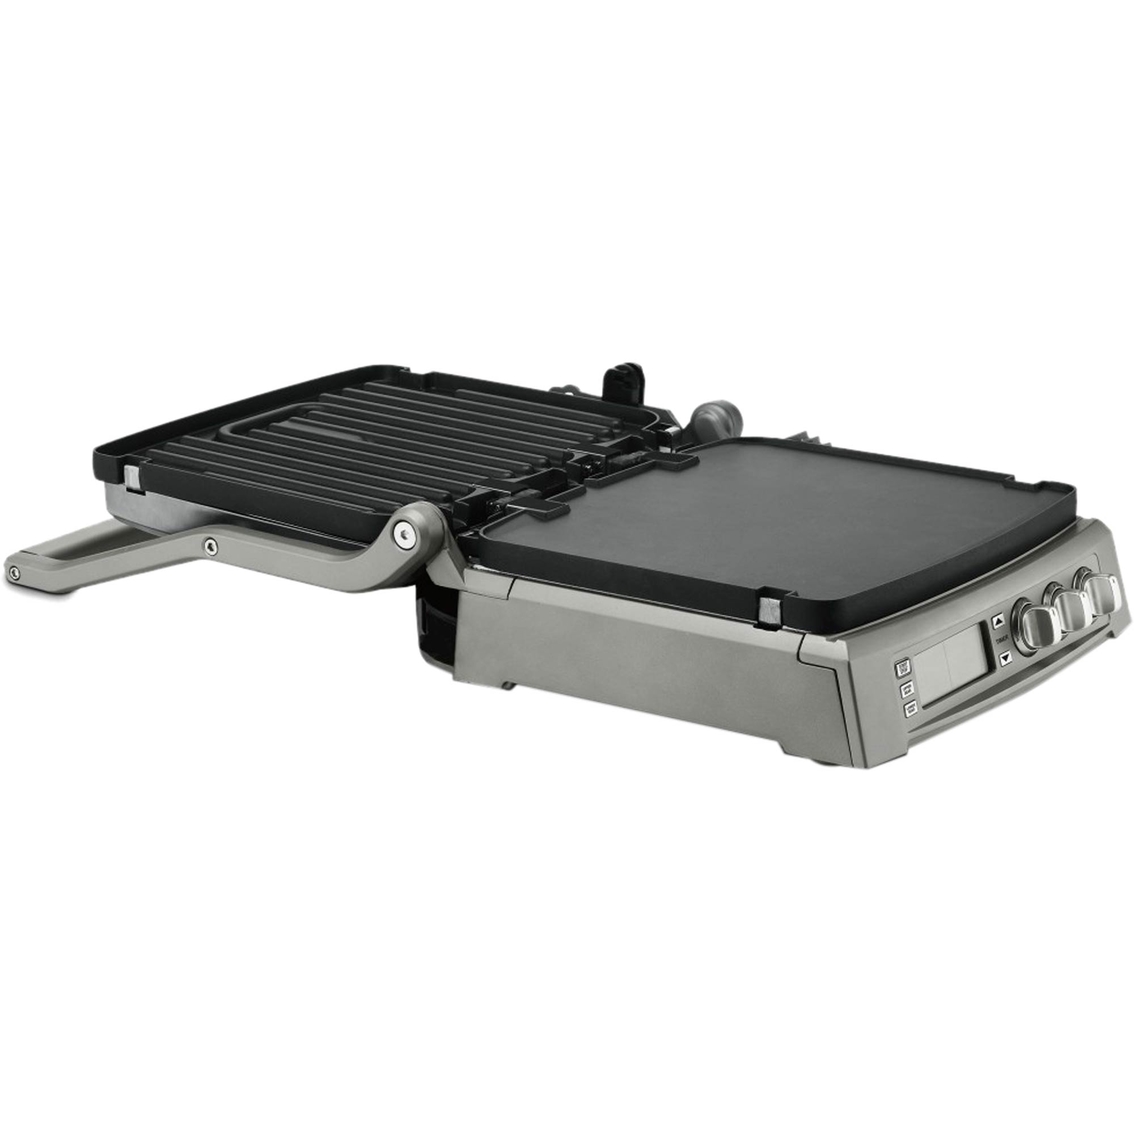 Cuisinart Griddler Grill and Panini Press - Image 5 of 5